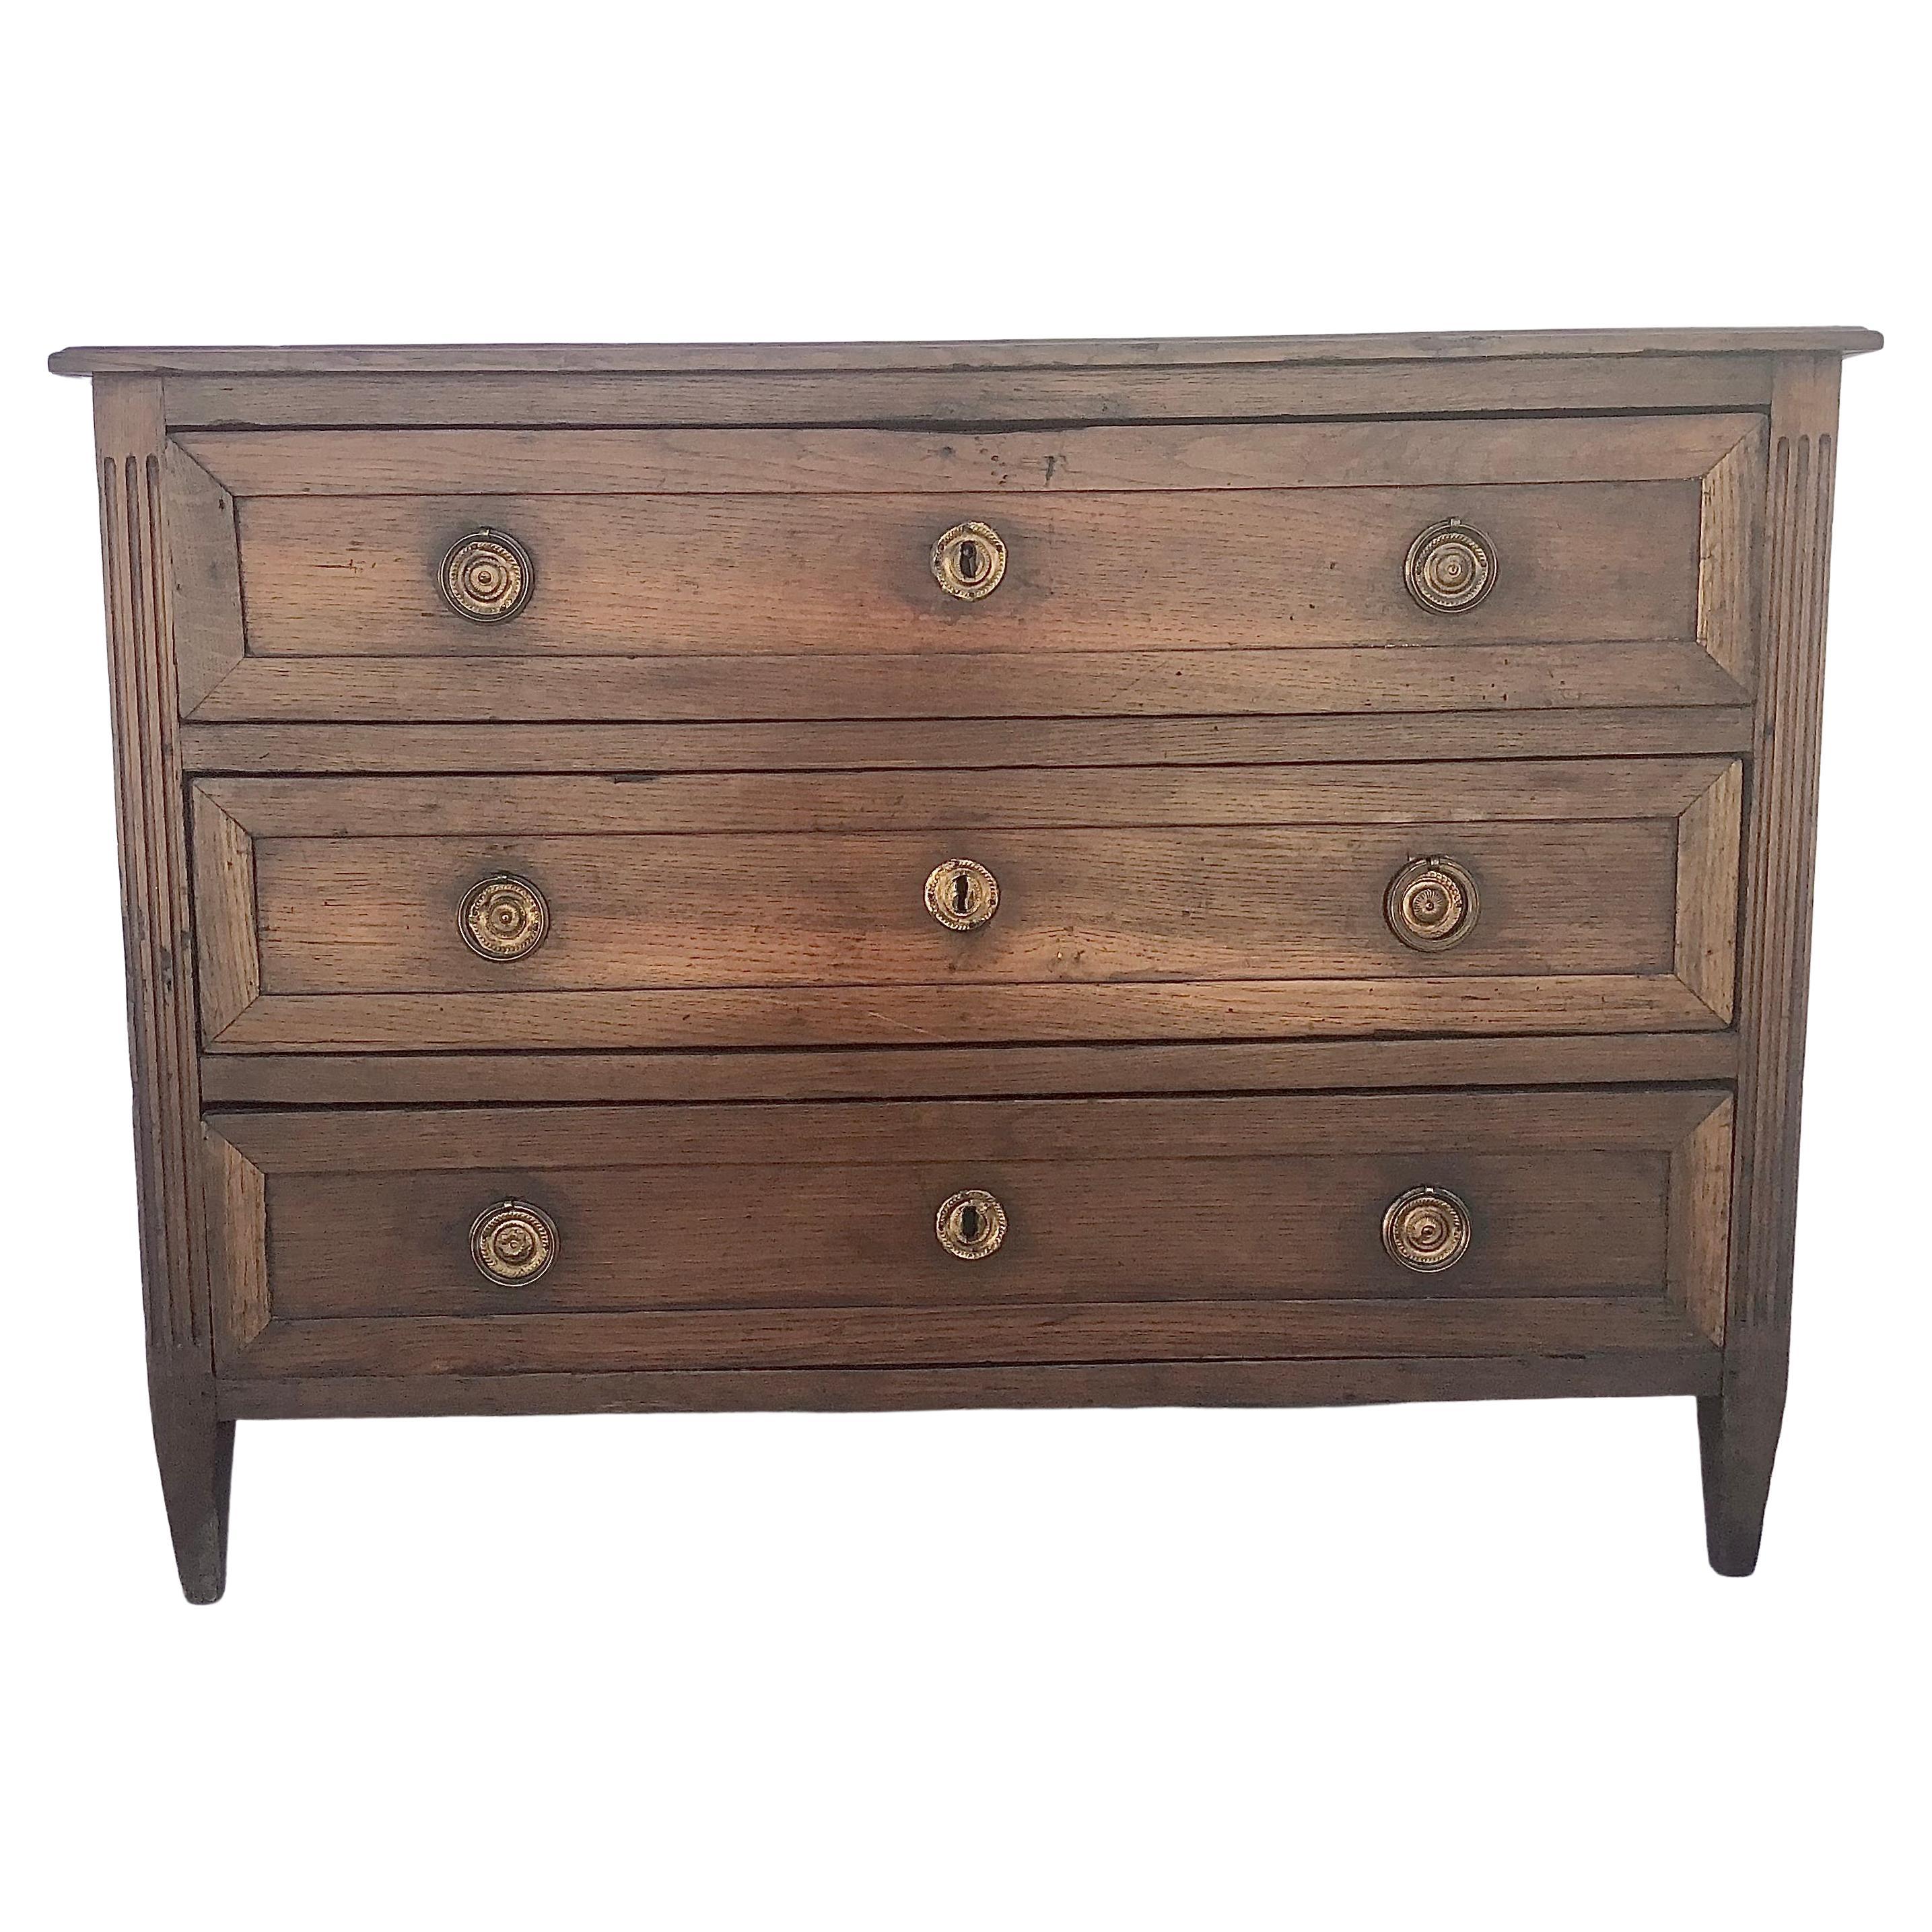 1820s Neoclassical Period French Three-Drawer Walnut Commode with Brass Trim